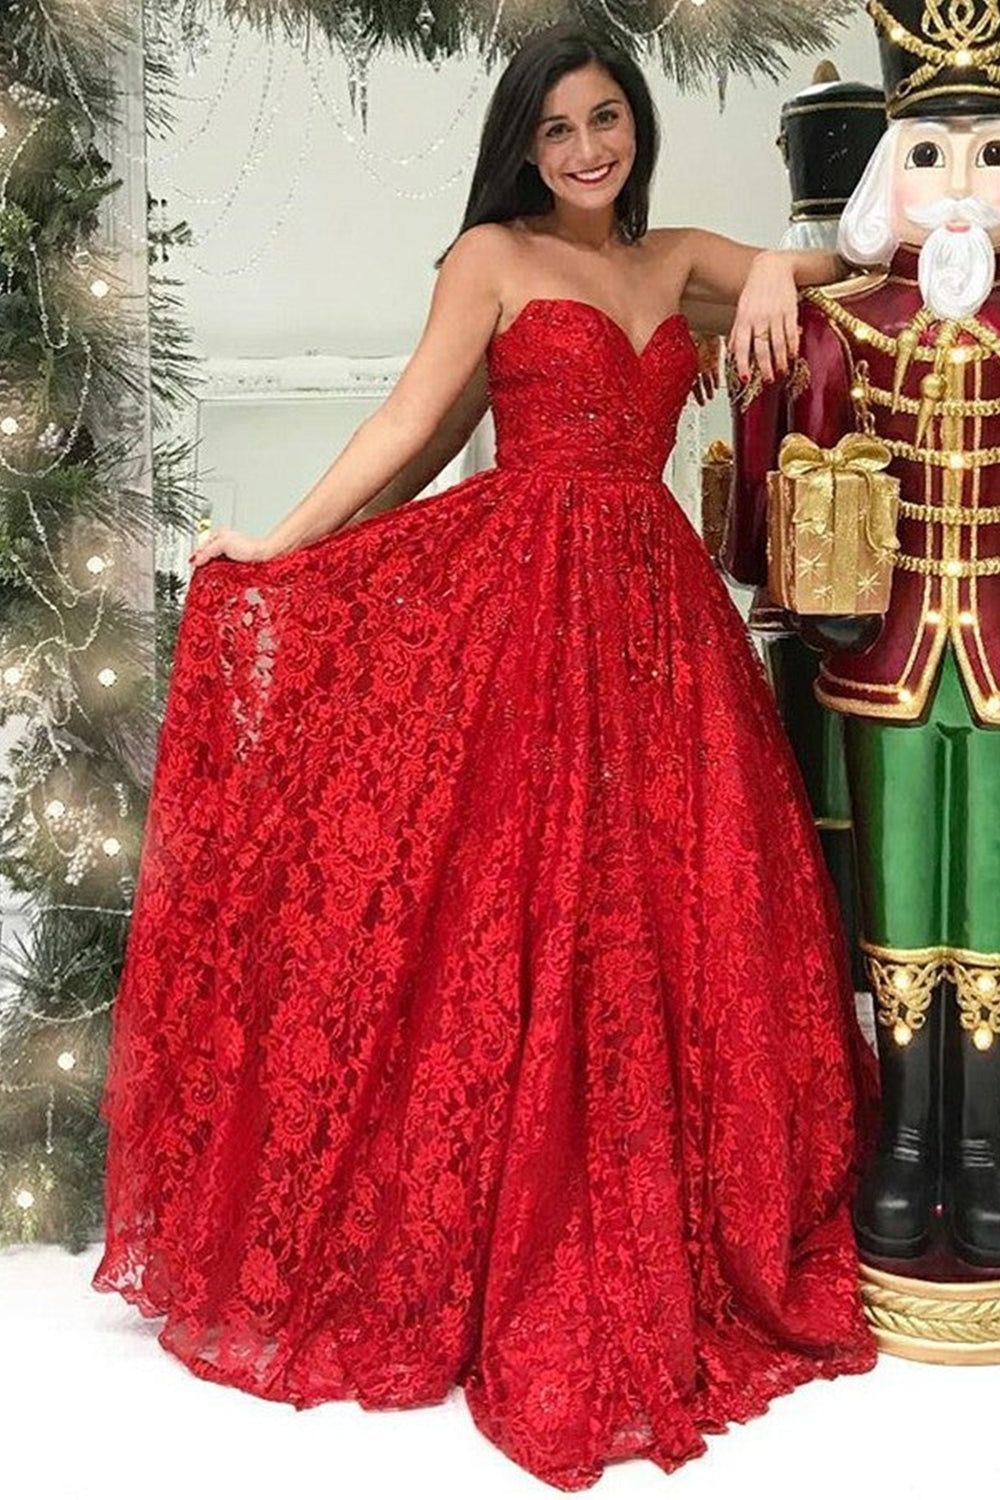 Sweetheart Neck Red Lace Long Prom Dresses, Strapless Red Formal Dresses, Red Lace Evening Dresses EP1660